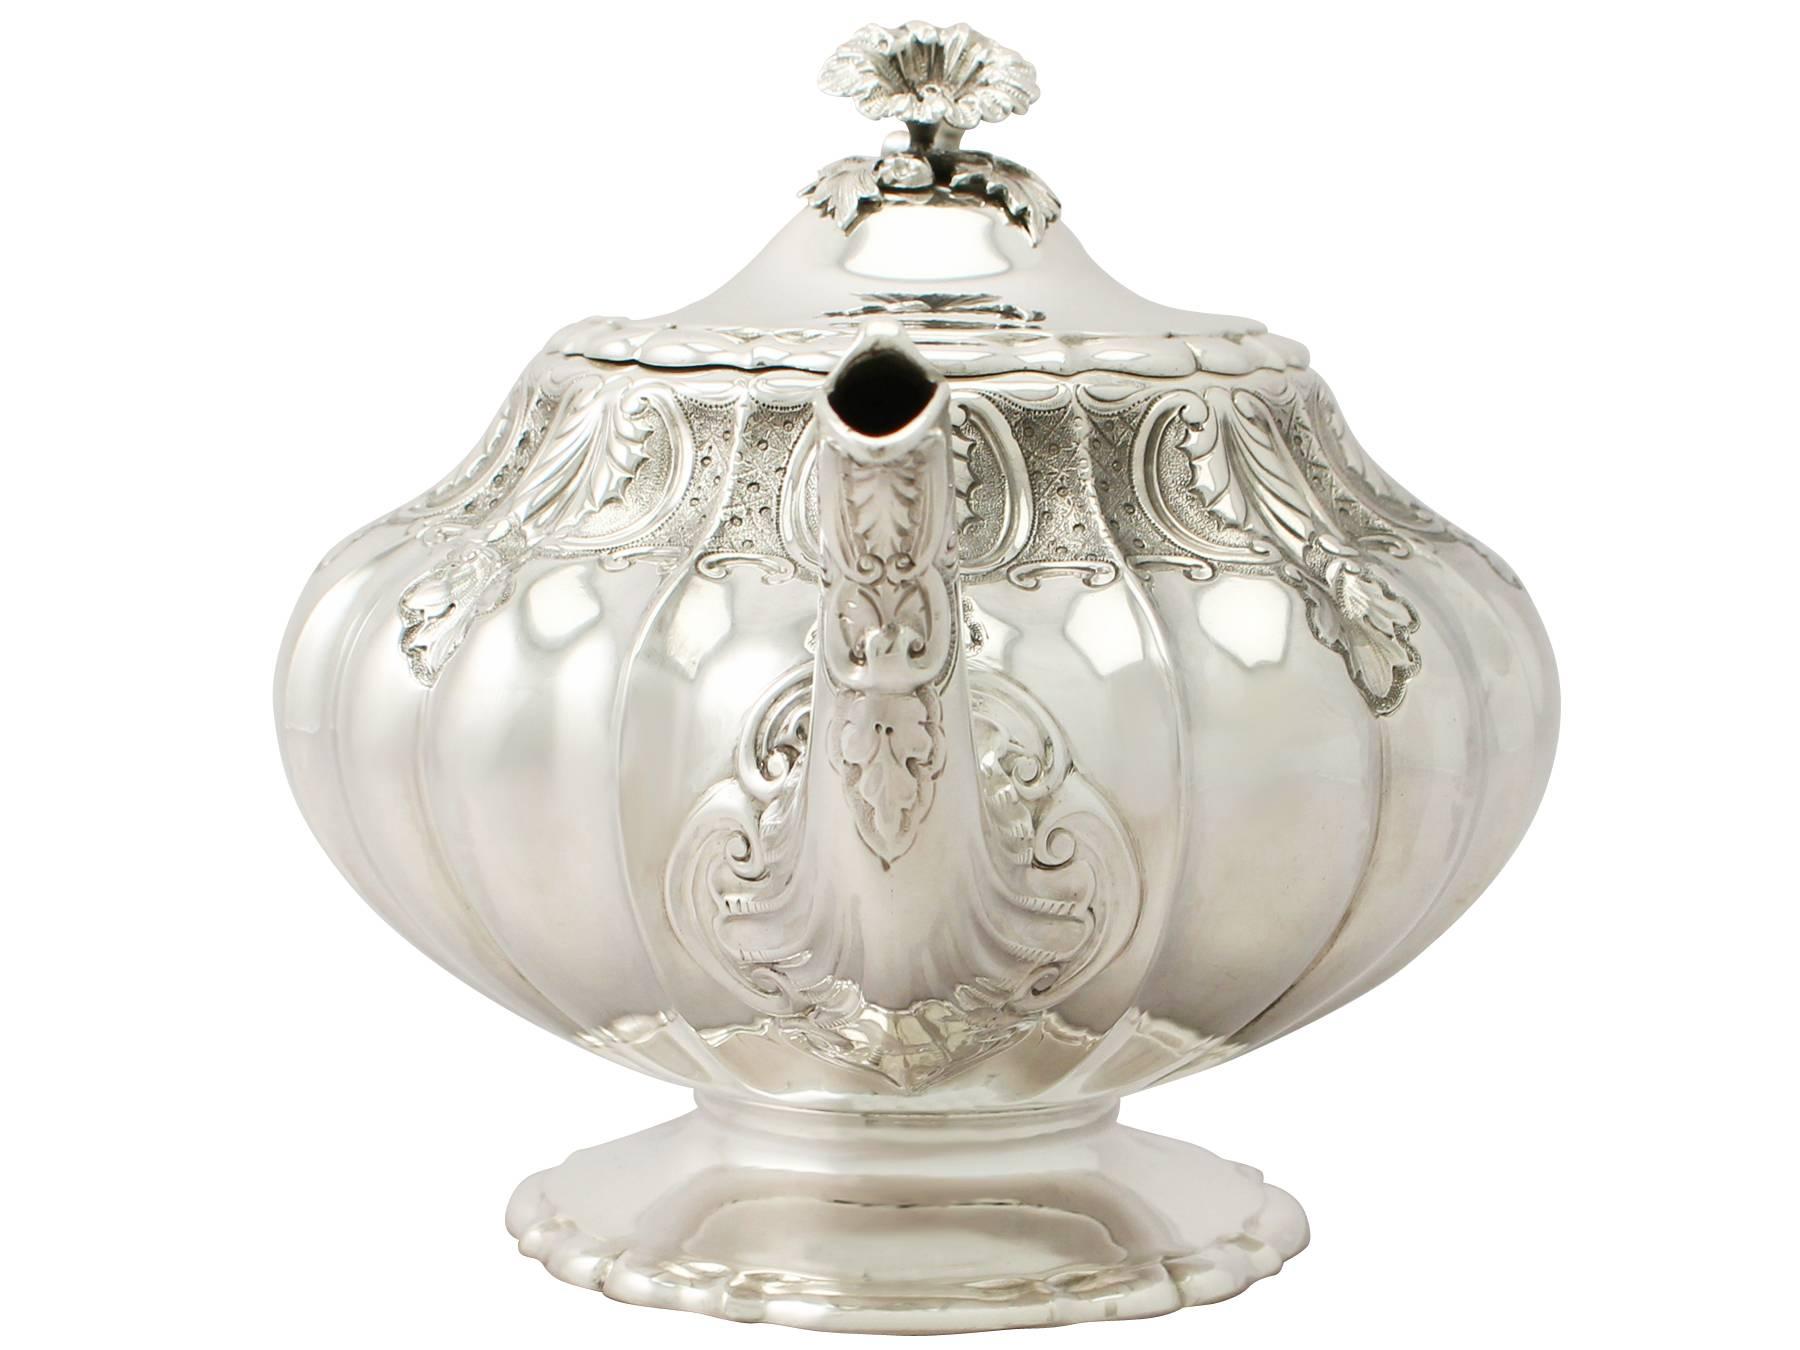 An exceptional, fine and impressive antique Victorian English sterling silver teapot; an addition to our silver teaware collection

This exceptional antique Victorian sterling silver teapot has a melon shaped form.

The upper portion of the